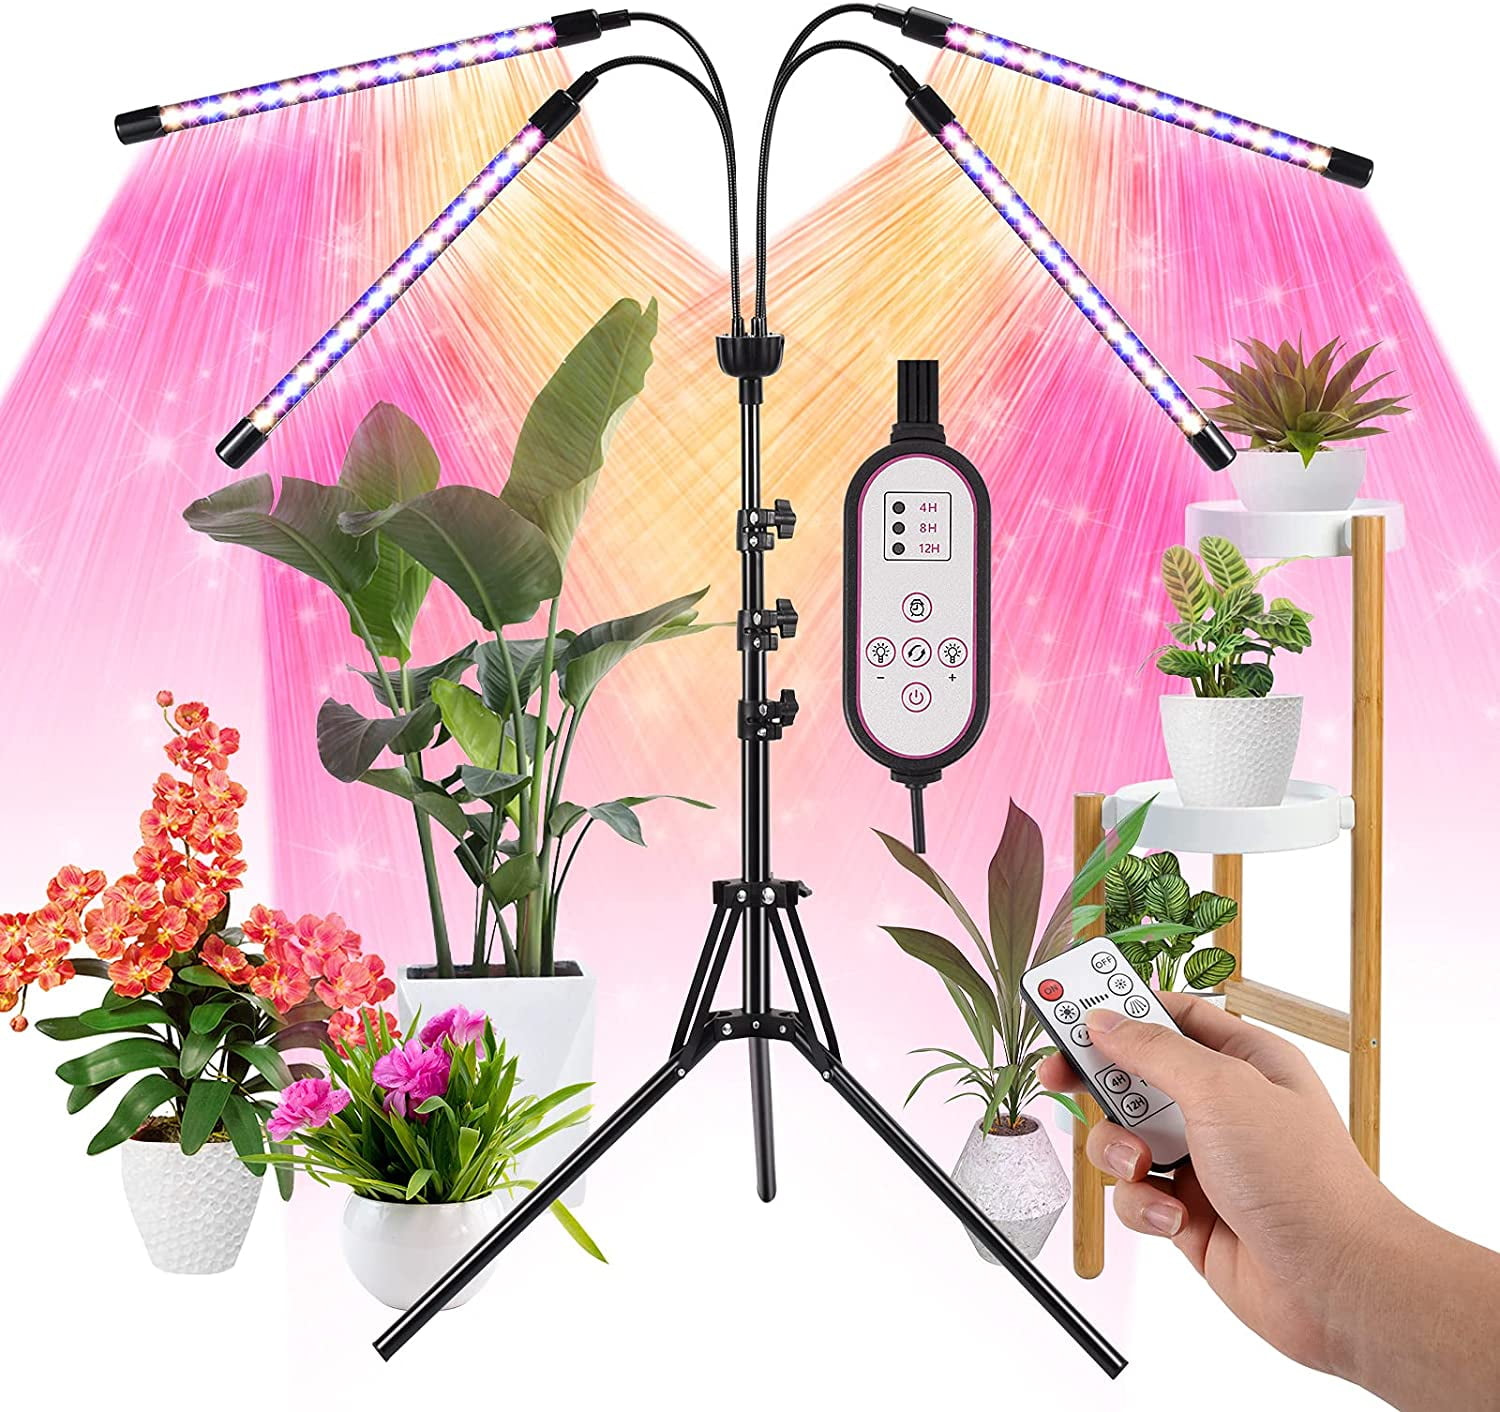 Grow Lights For Plants With Stand Full Spectrum Grow LightPlant Growing Lamps 